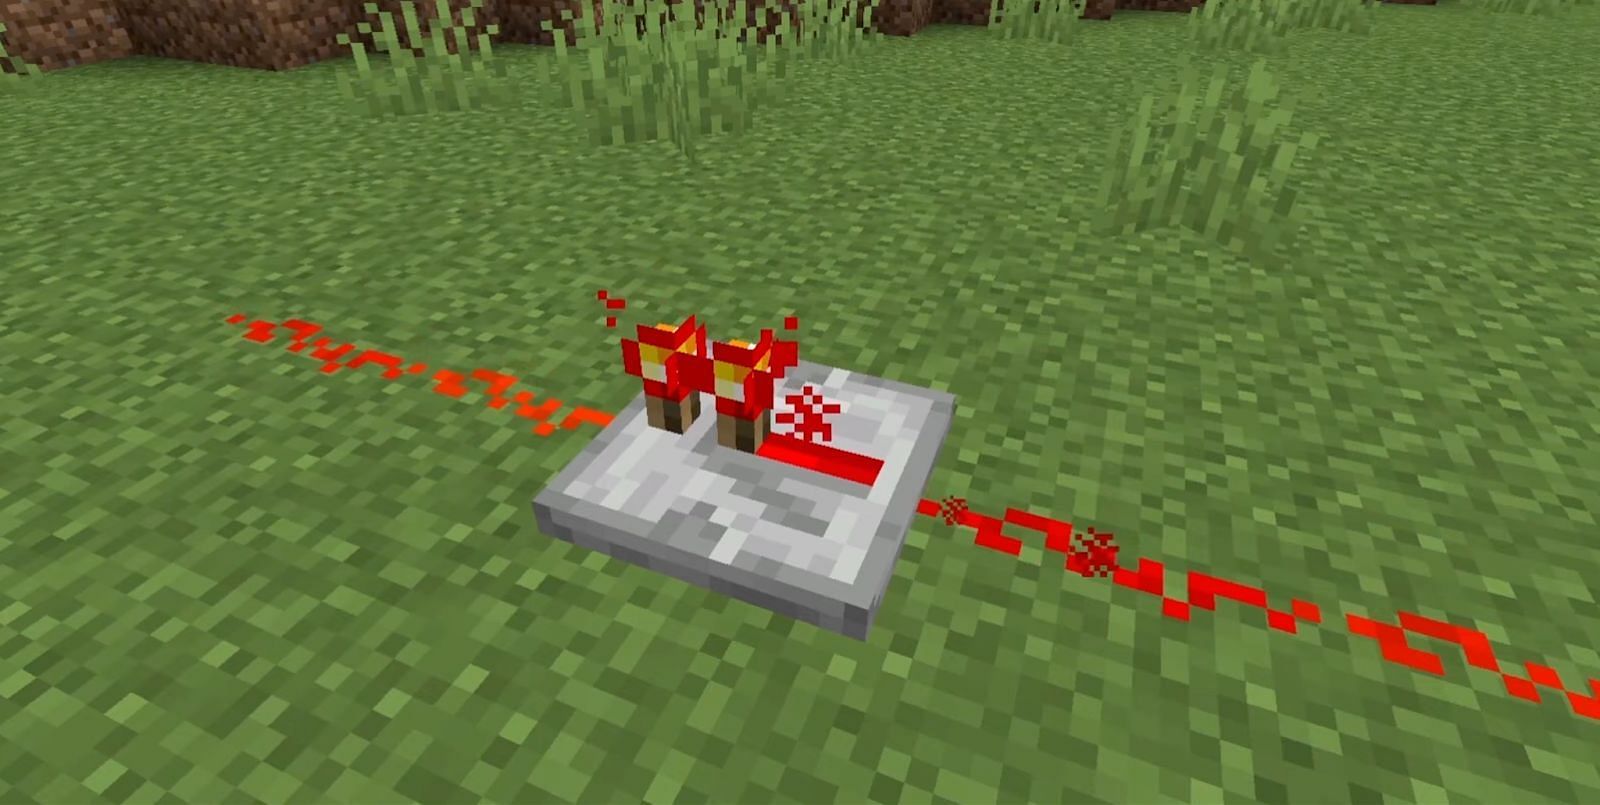 How to Craft a Redstone Repeater in Minecraft